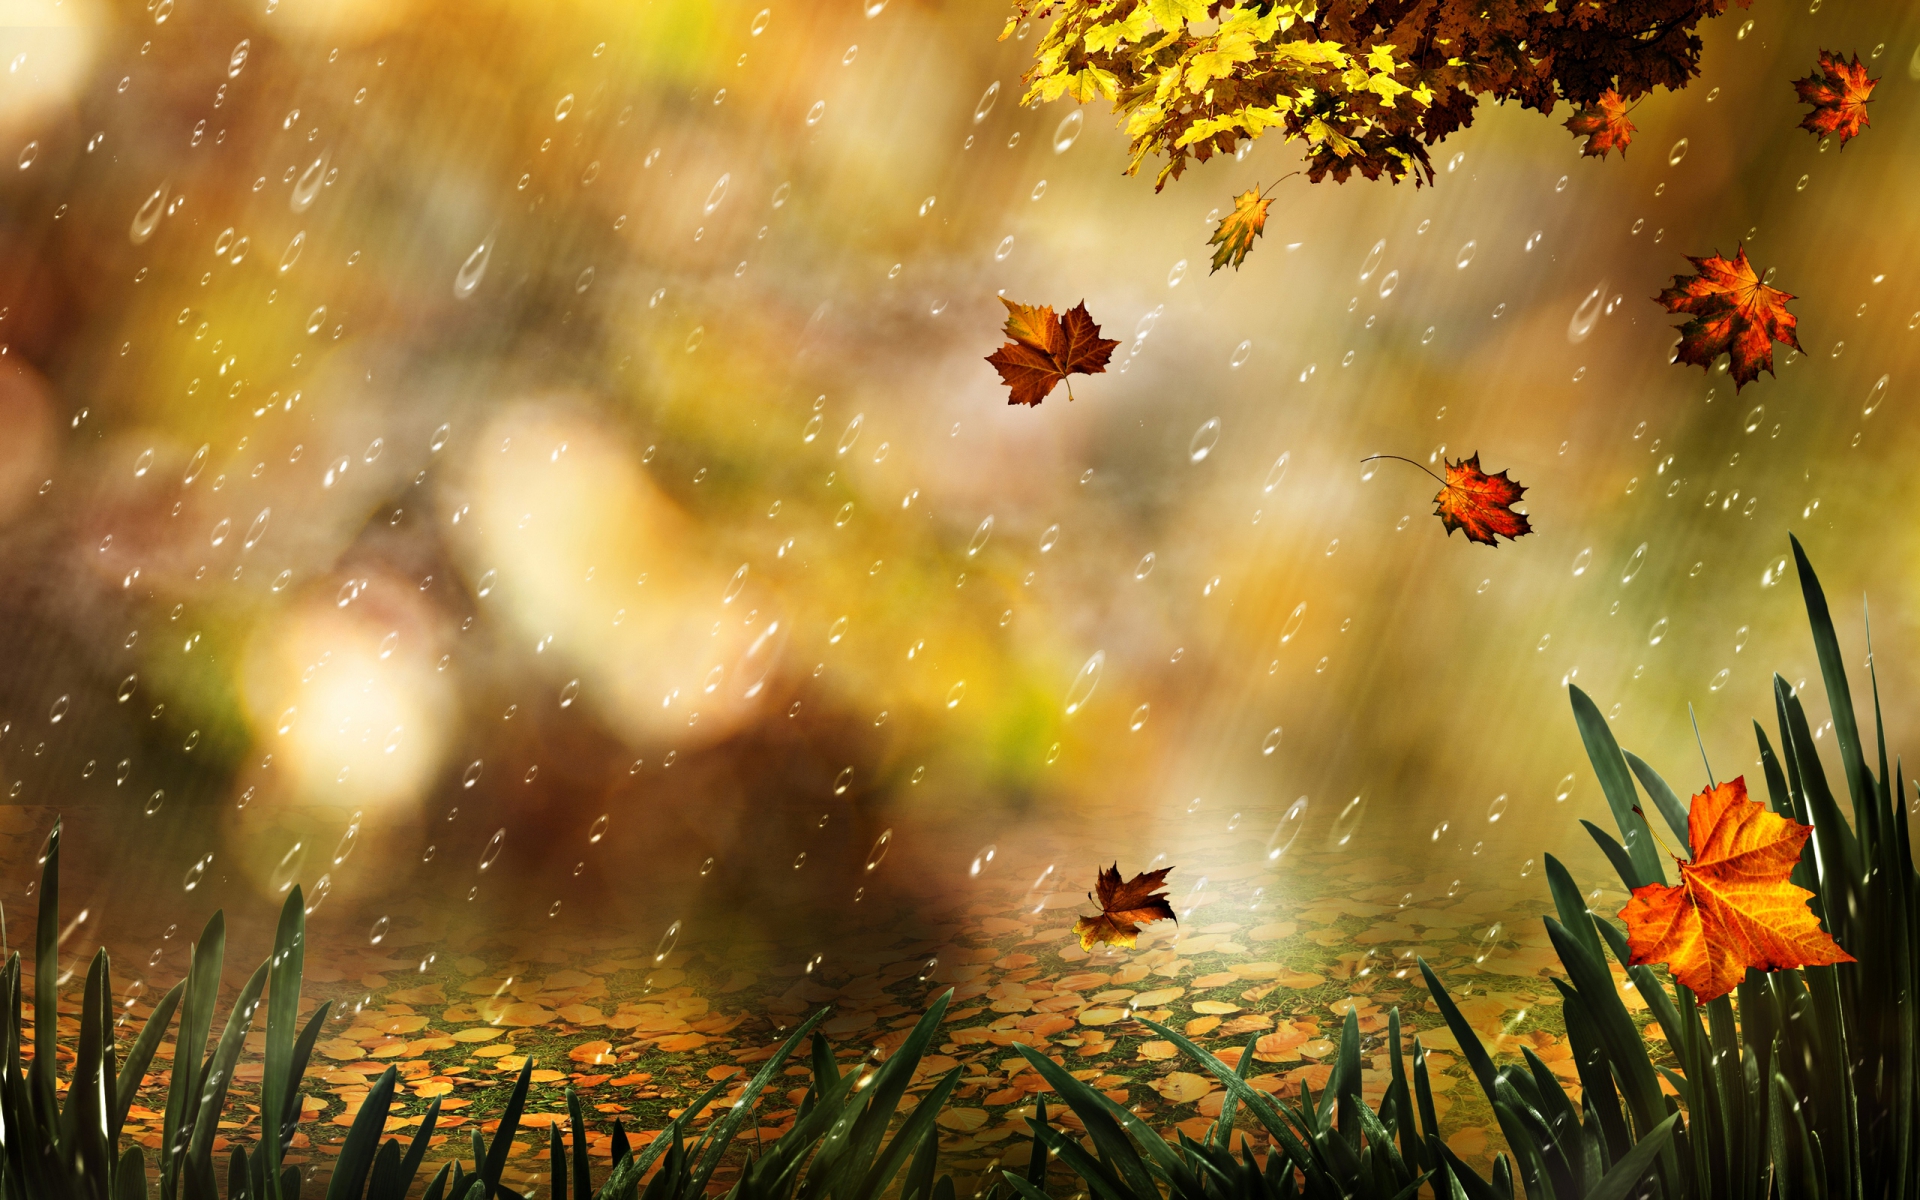 Fall Computer Wallpapers, Desktop Backgrounds - Autumn Leaves And Rain - HD Wallpaper 